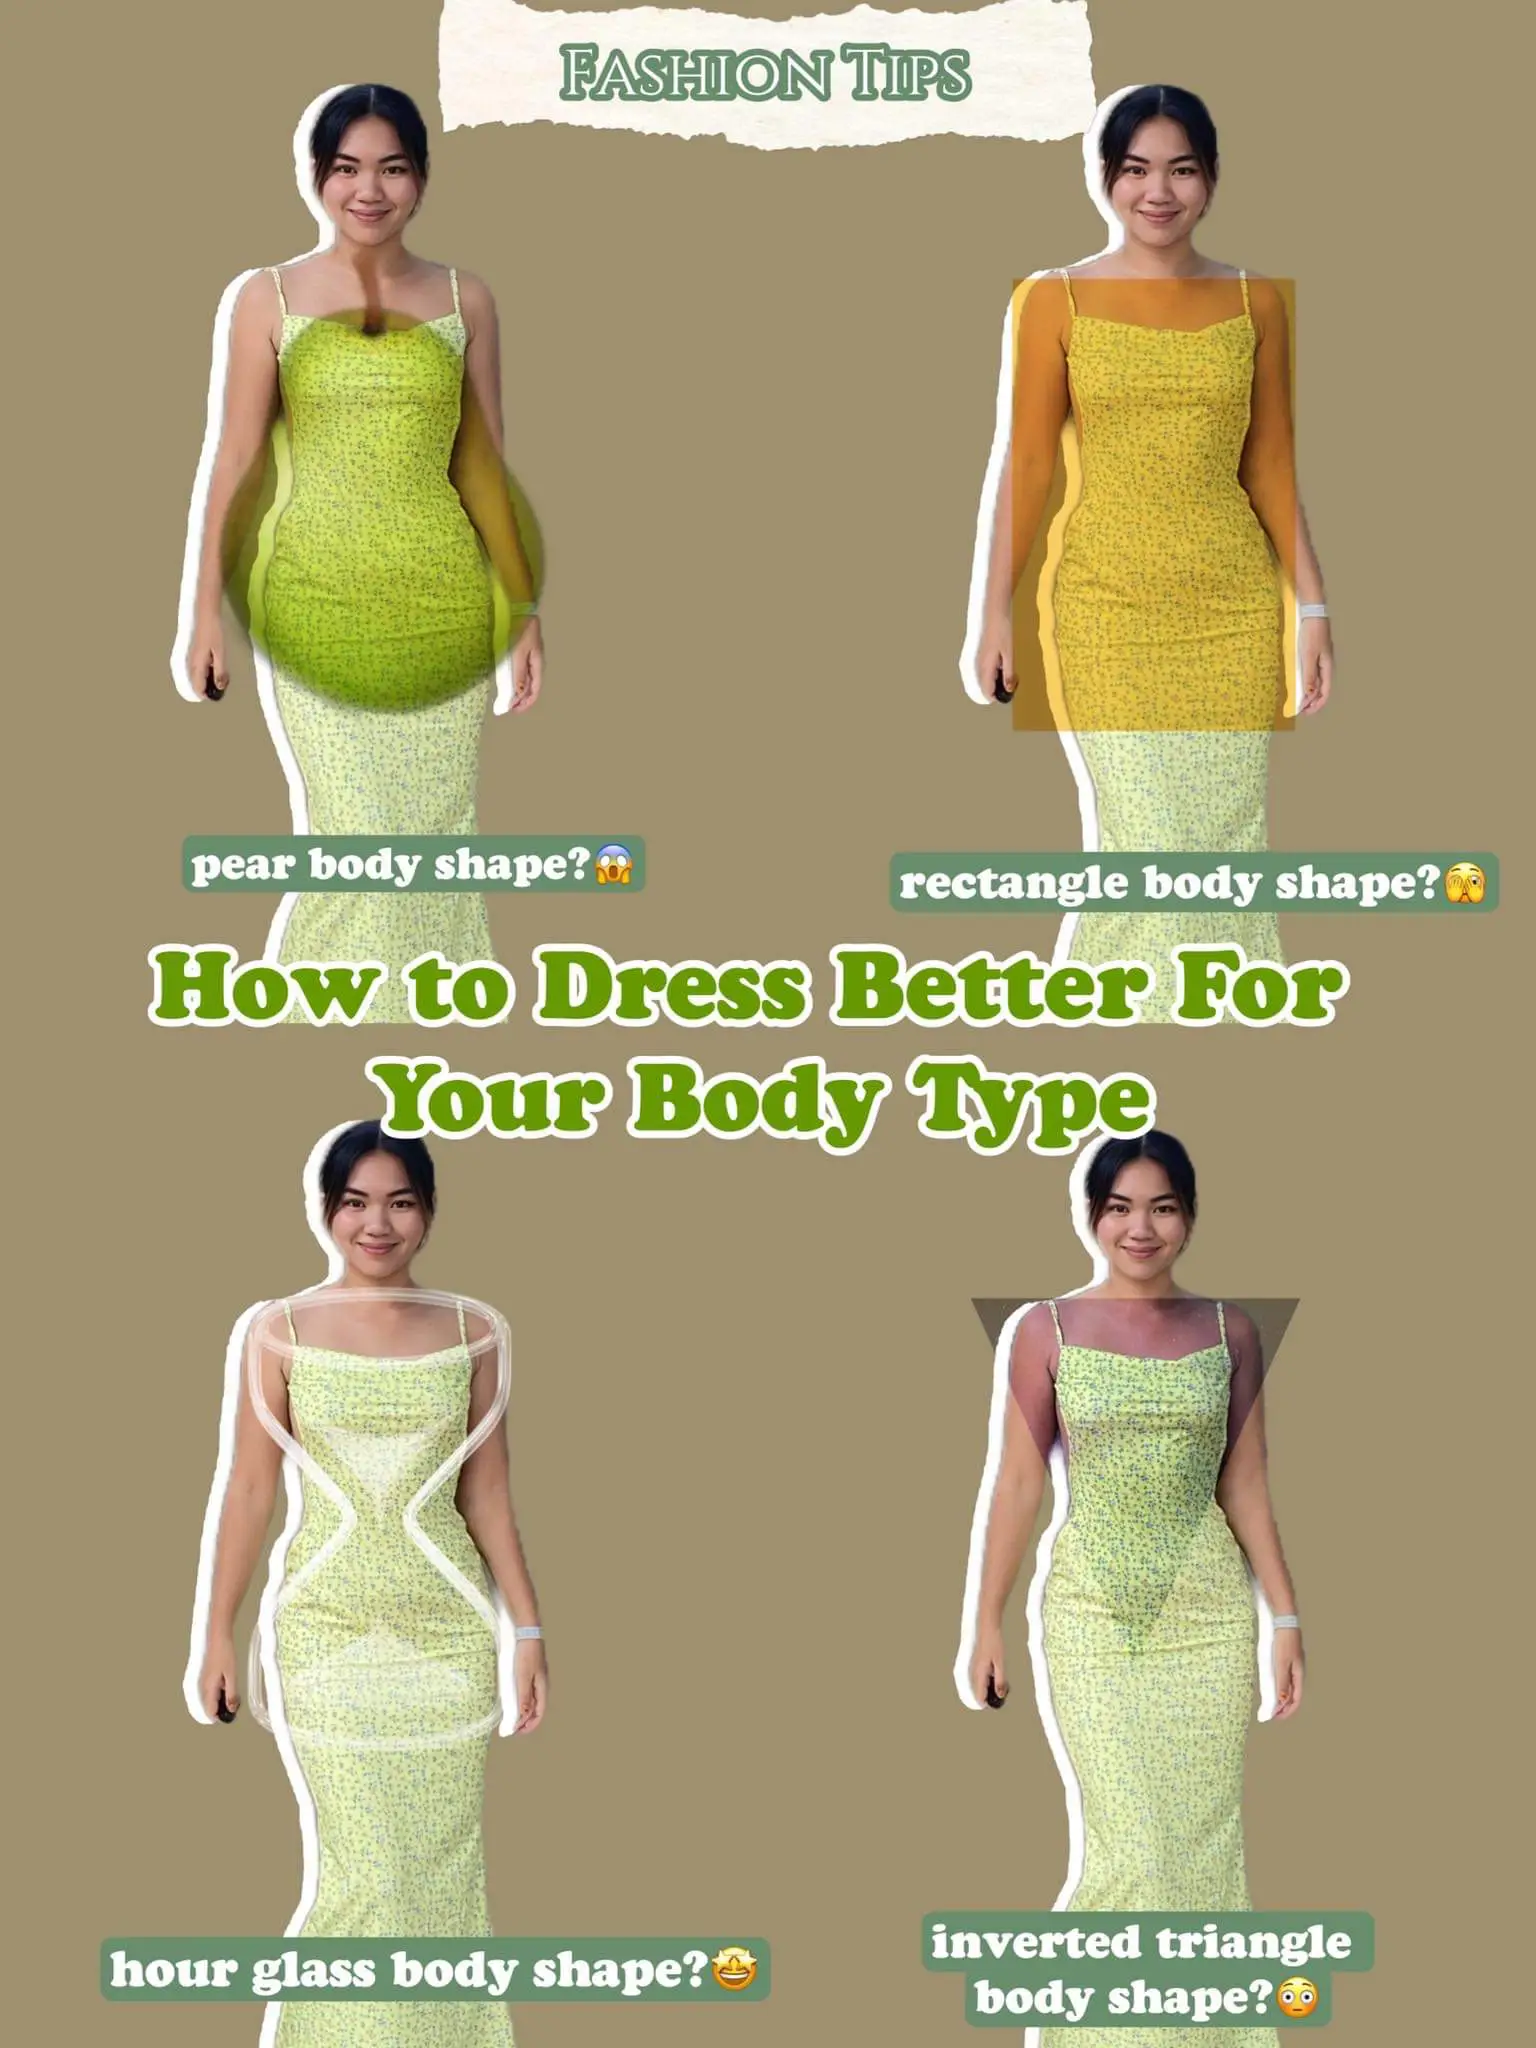 How To Dress An Inverted Triangle Body Shape To Create Proportion